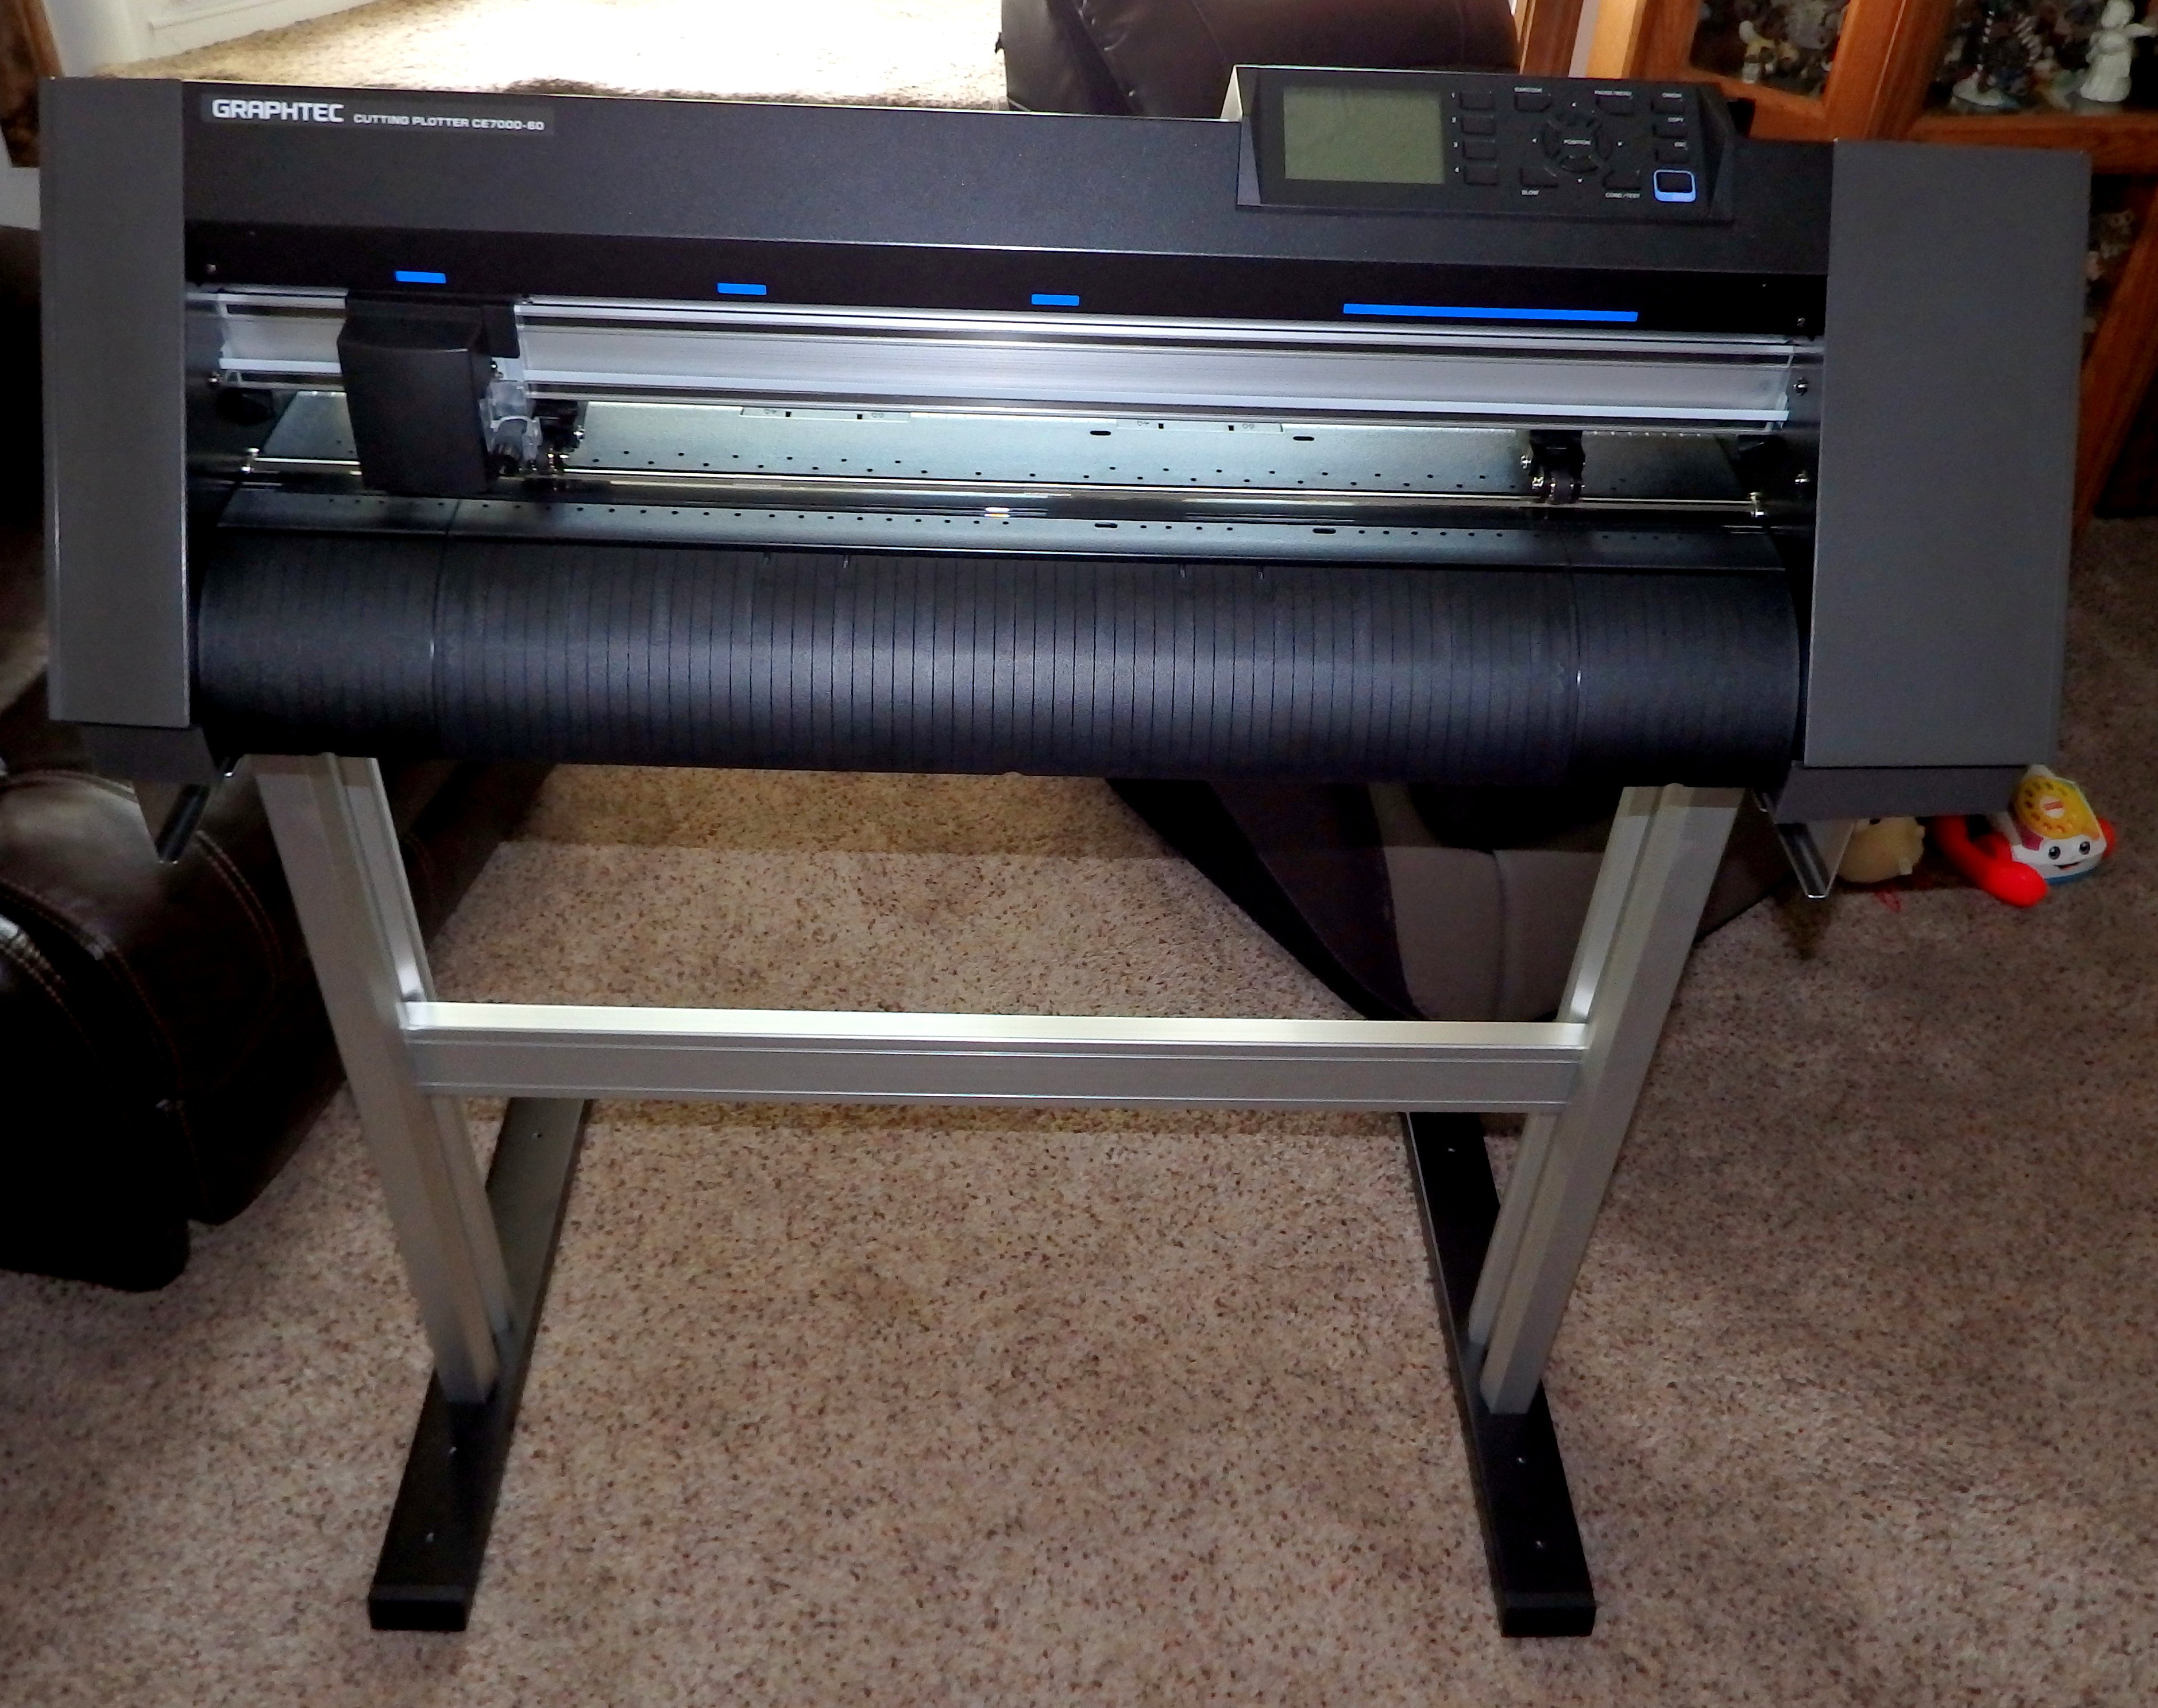 Help with CE-Lite 50 - GraphTec Cutting Plotter Discussion